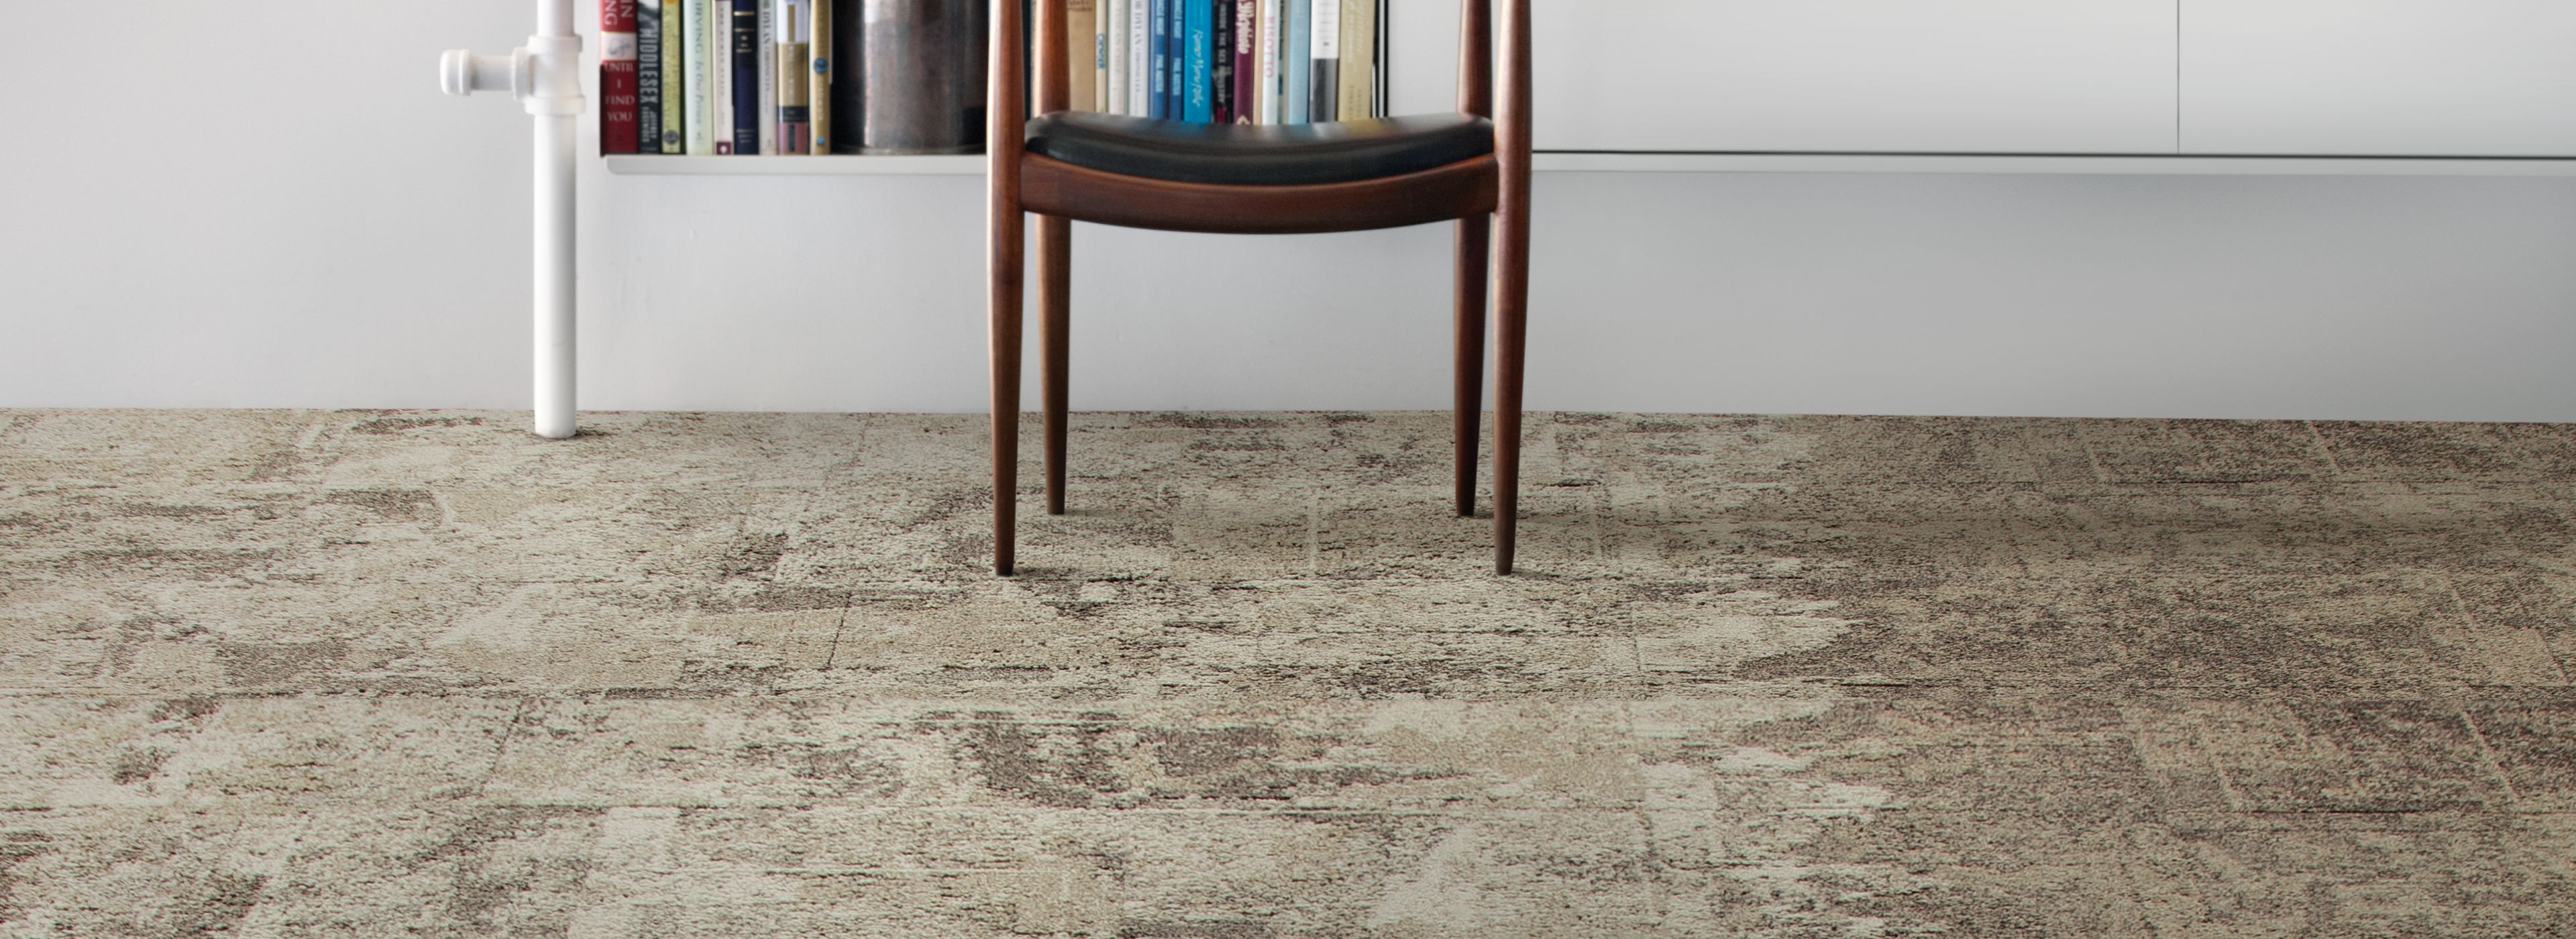 Interface B601, B602 and B603 carpet tile in library with wooden chair Bildnummer 1